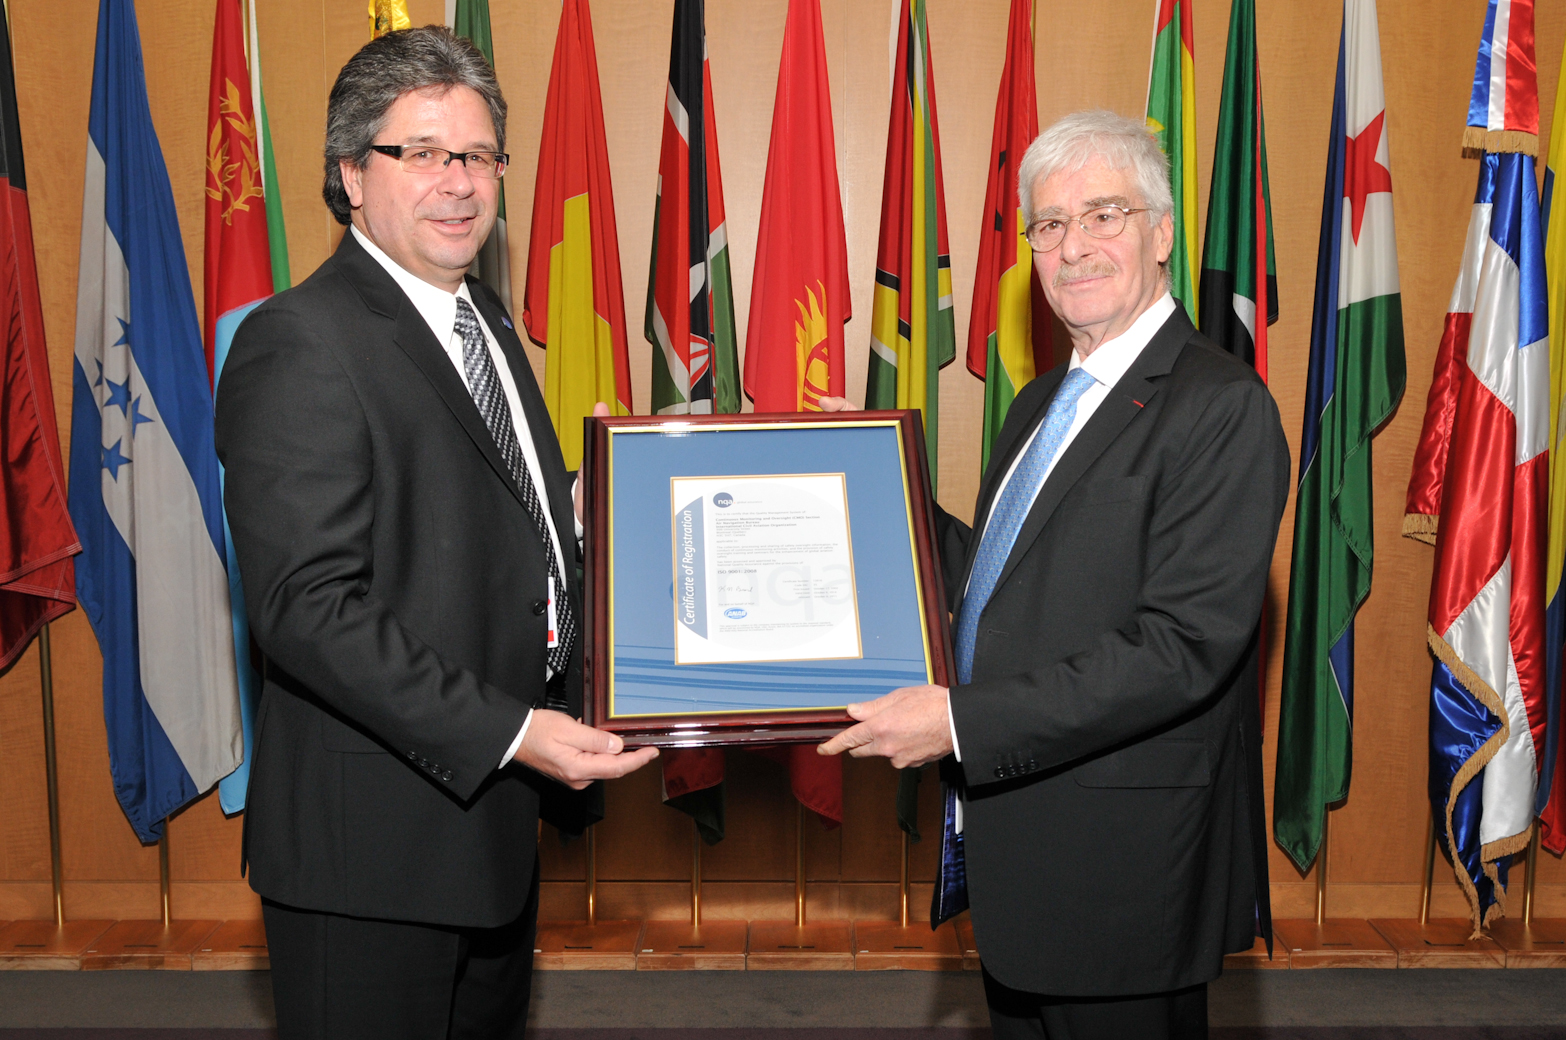 ICAO Secretary General Raymond Benjamin (right) receives the ISO 9001:2008 certificate from Mario David, Sales & Operations Manager for National Quality Assurance (NQA) – Canada